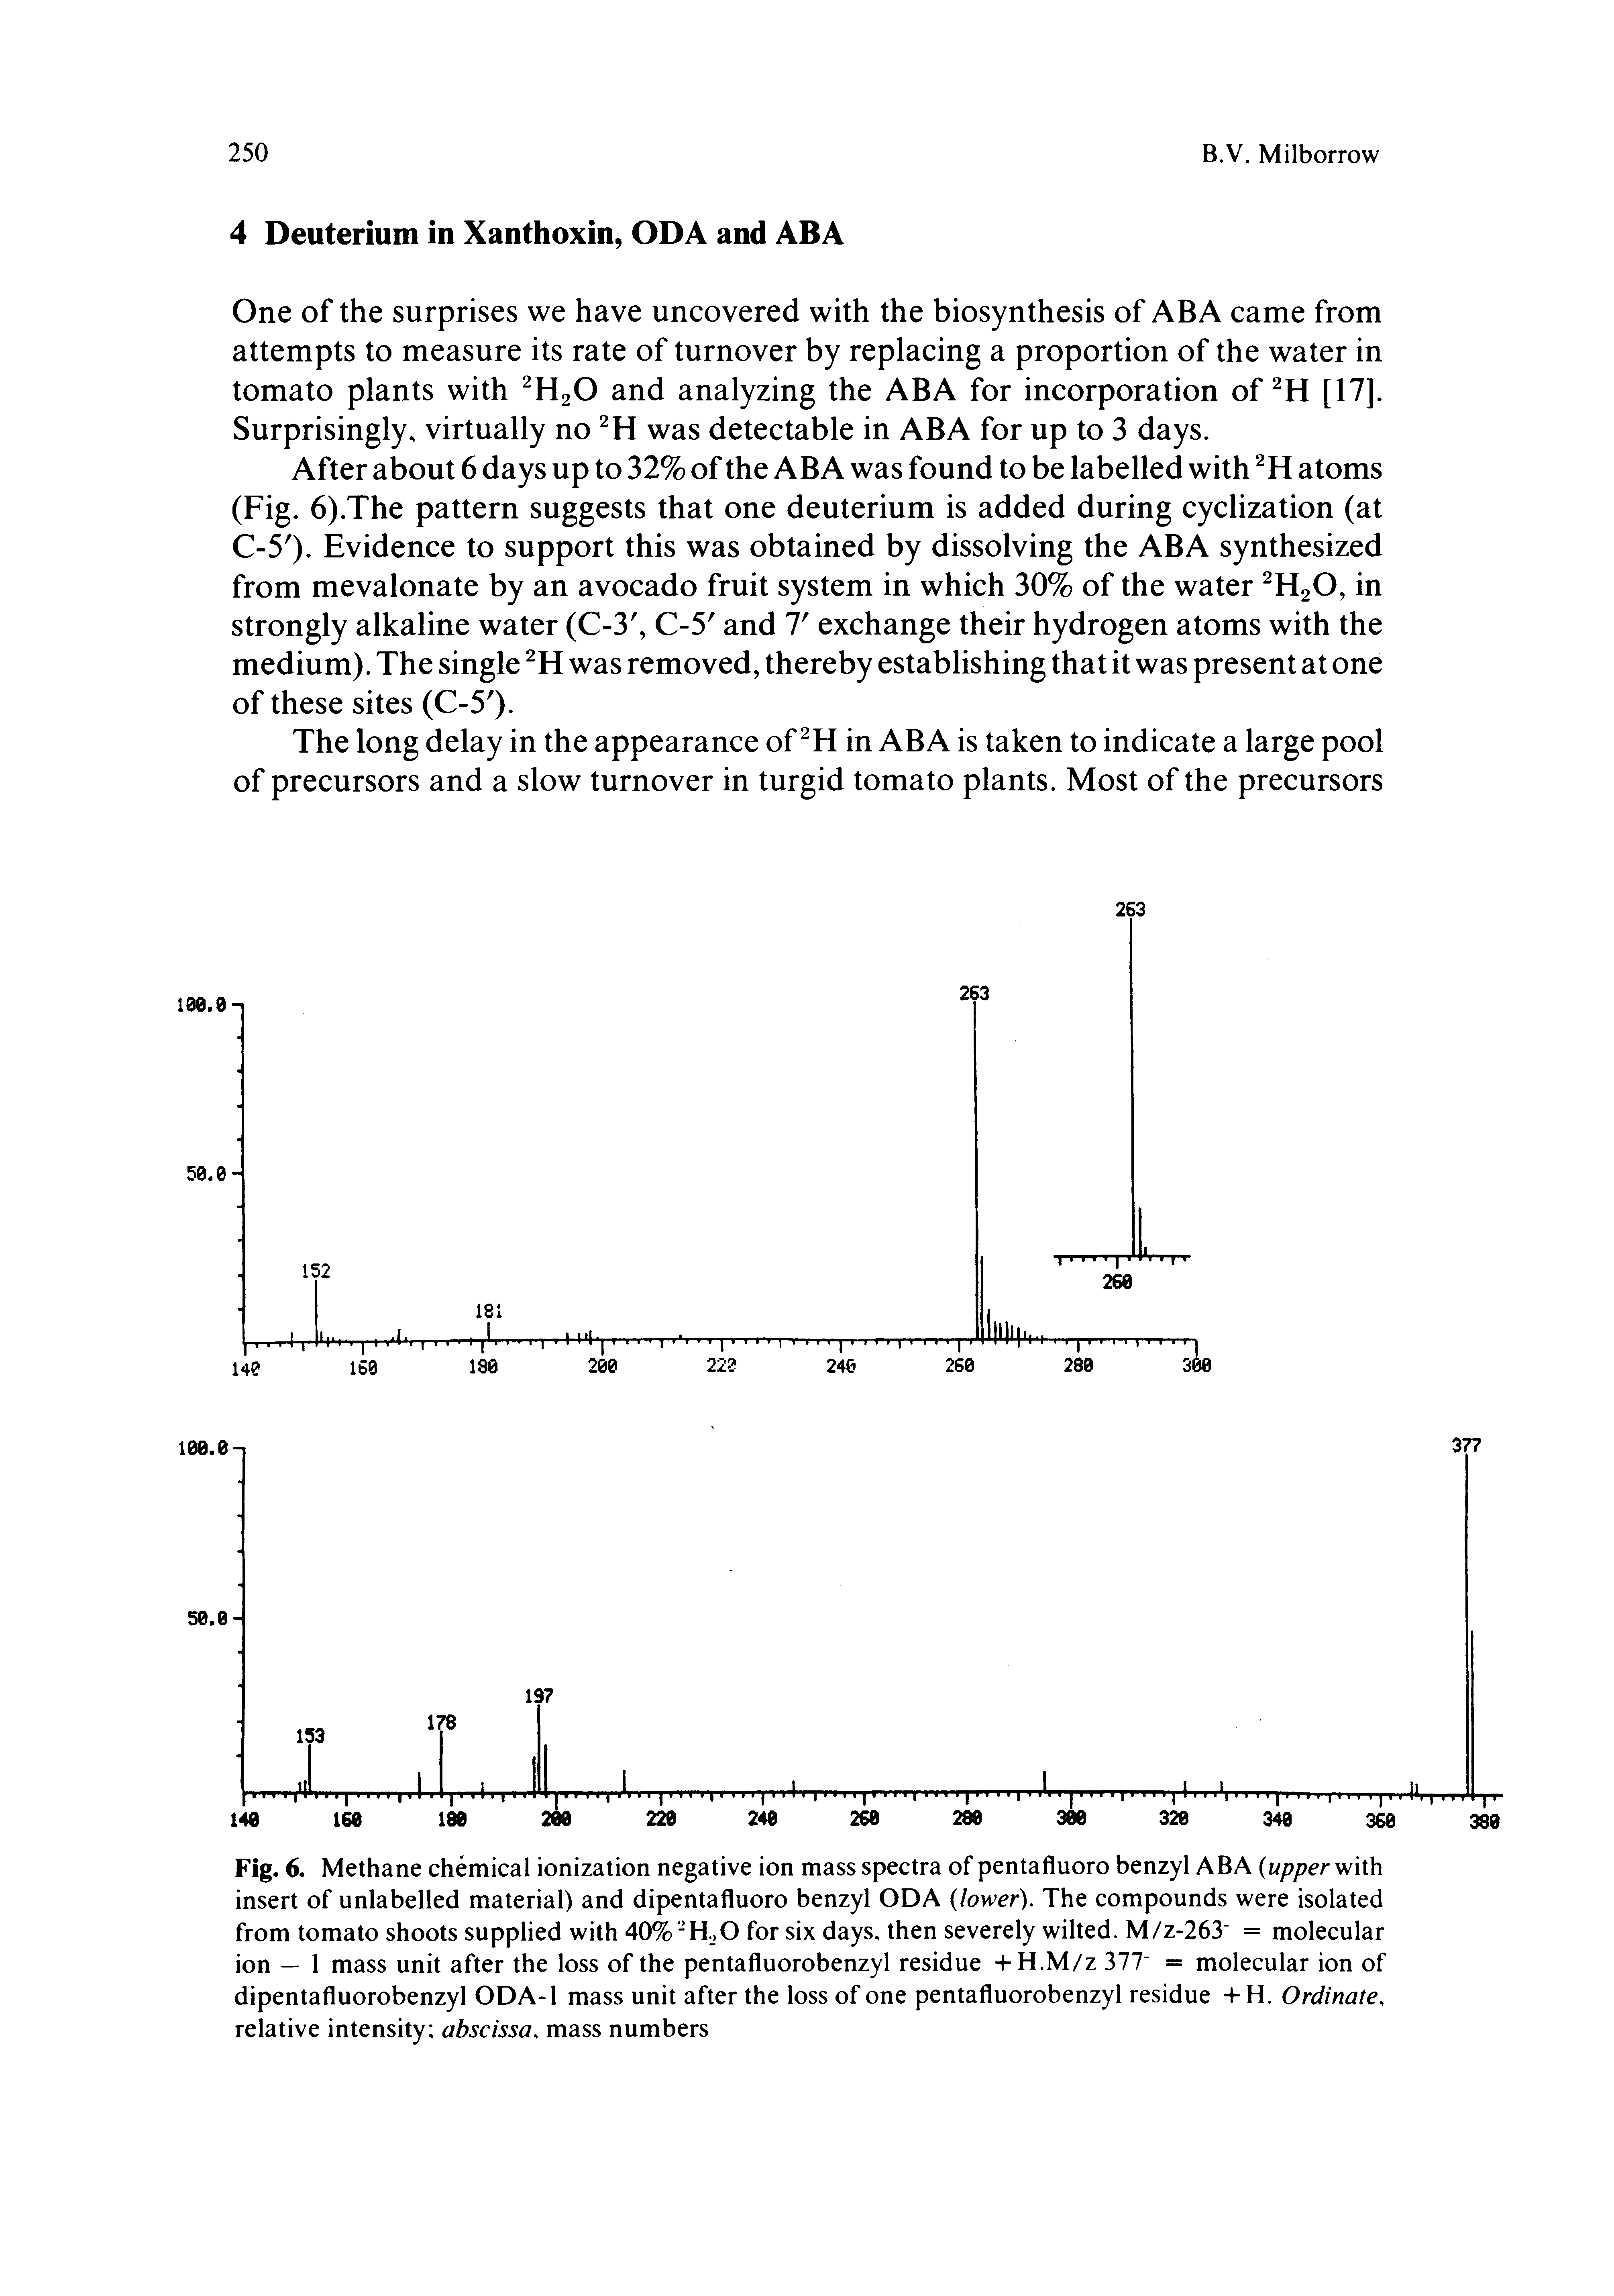 Fig. 6. Methane chemical ionization negative ion mass spectra of pentafluoro benzyl ABA upper with insert of unlabelled material) and dipentafluoro benzyl ODA lower). The compounds were isolated from tomato shoots supplied with 40% -H. >O for six days, then severely wilted. M/z-263 = molecular ion — 1 mass unit after the loss of the pentafluorobenzyl residue +H.M/Z 377 = molecular ion of dipentafluorobenzyl ODA-1 mass unit after the loss of one pentafluorobenzyl residue +H. Ordinate. relative intensity abscissa, mass numbers...